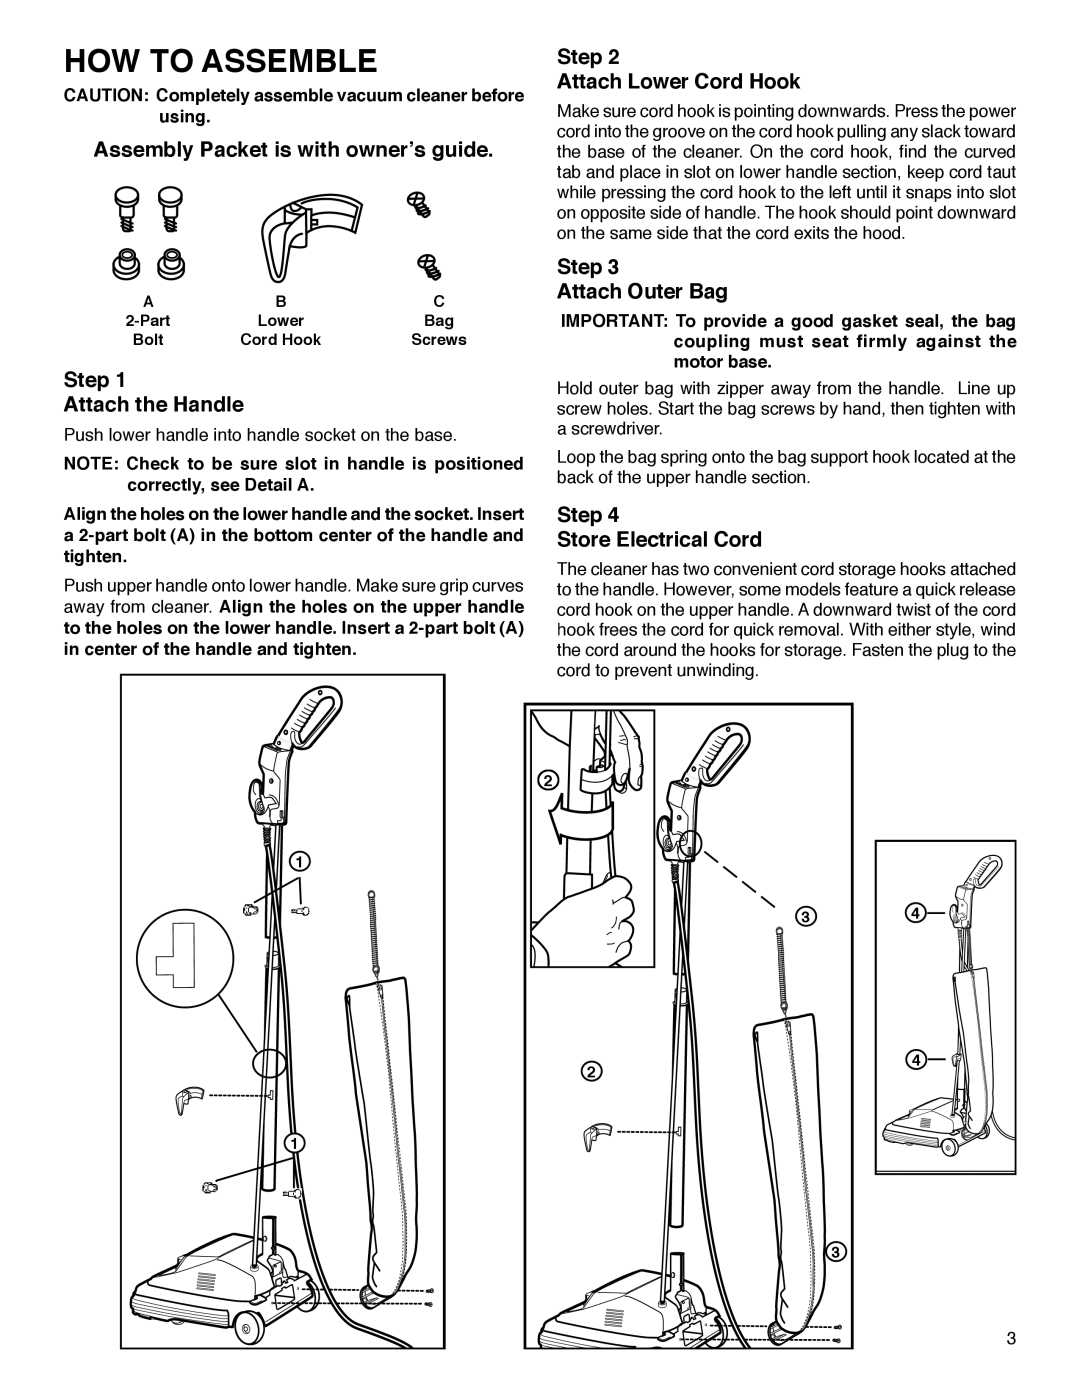 Electrolux S670 How To Assemble, Assembly Packet is with ownerʼs guide, Step Attach the Handle, Step Attach Outer Bag 